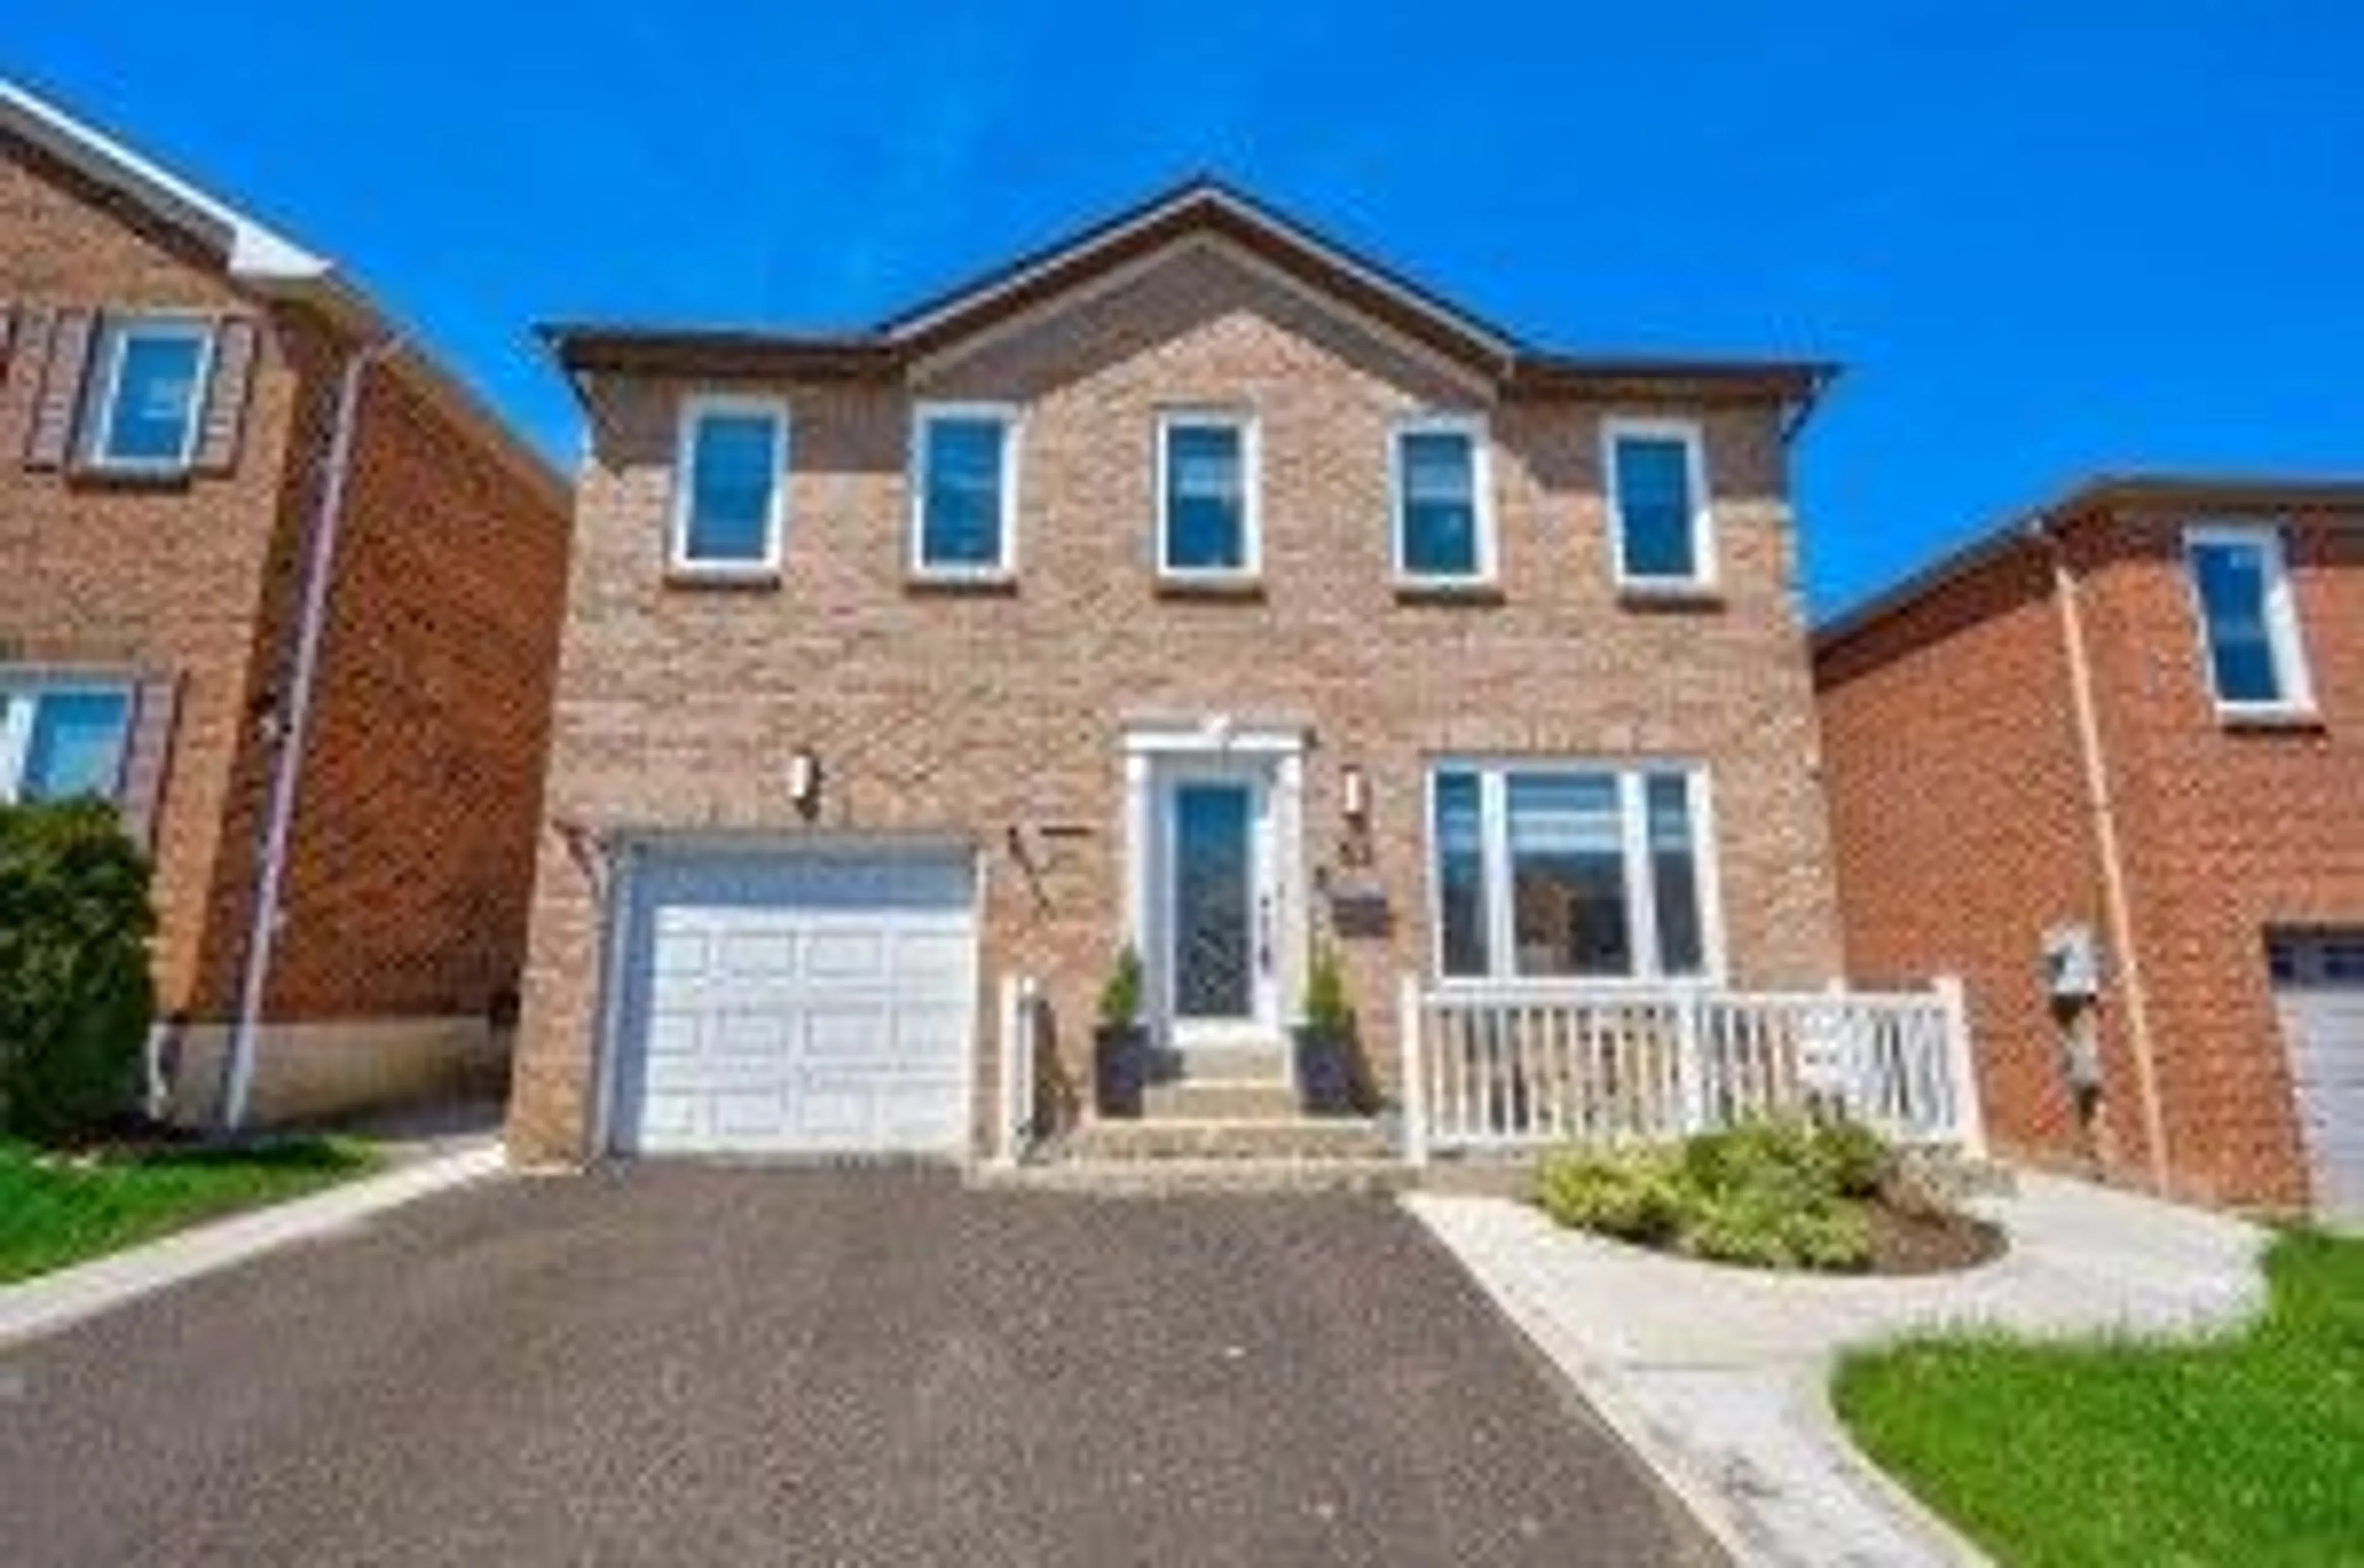 Home with brick exterior material for 53 Nuttall St, Brampton Ontario L6S 4V1